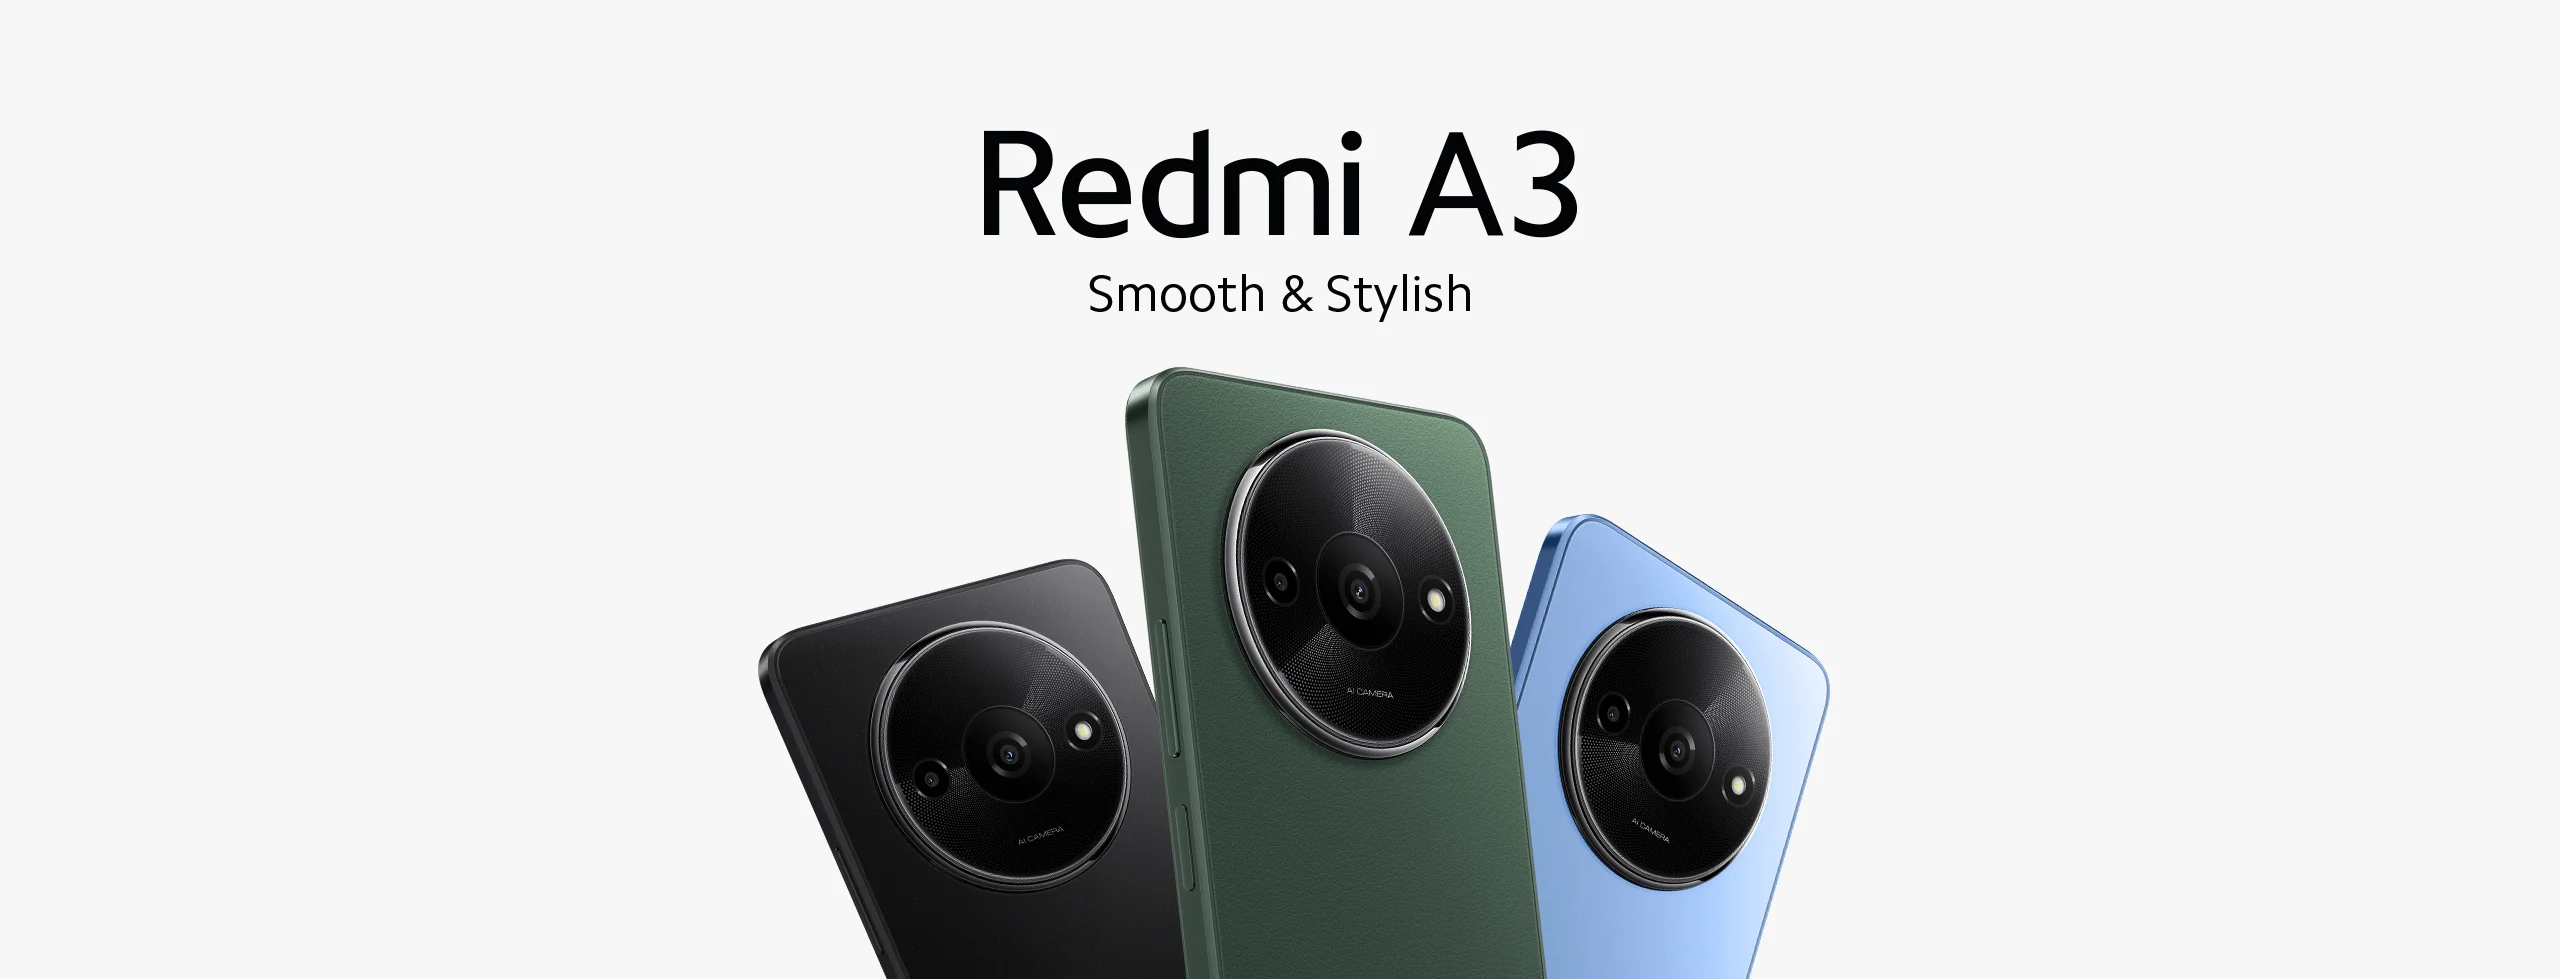 Xiaomi launched Redmi A3 with a stunning 6.71″ LCD display and 5000 mAh battery